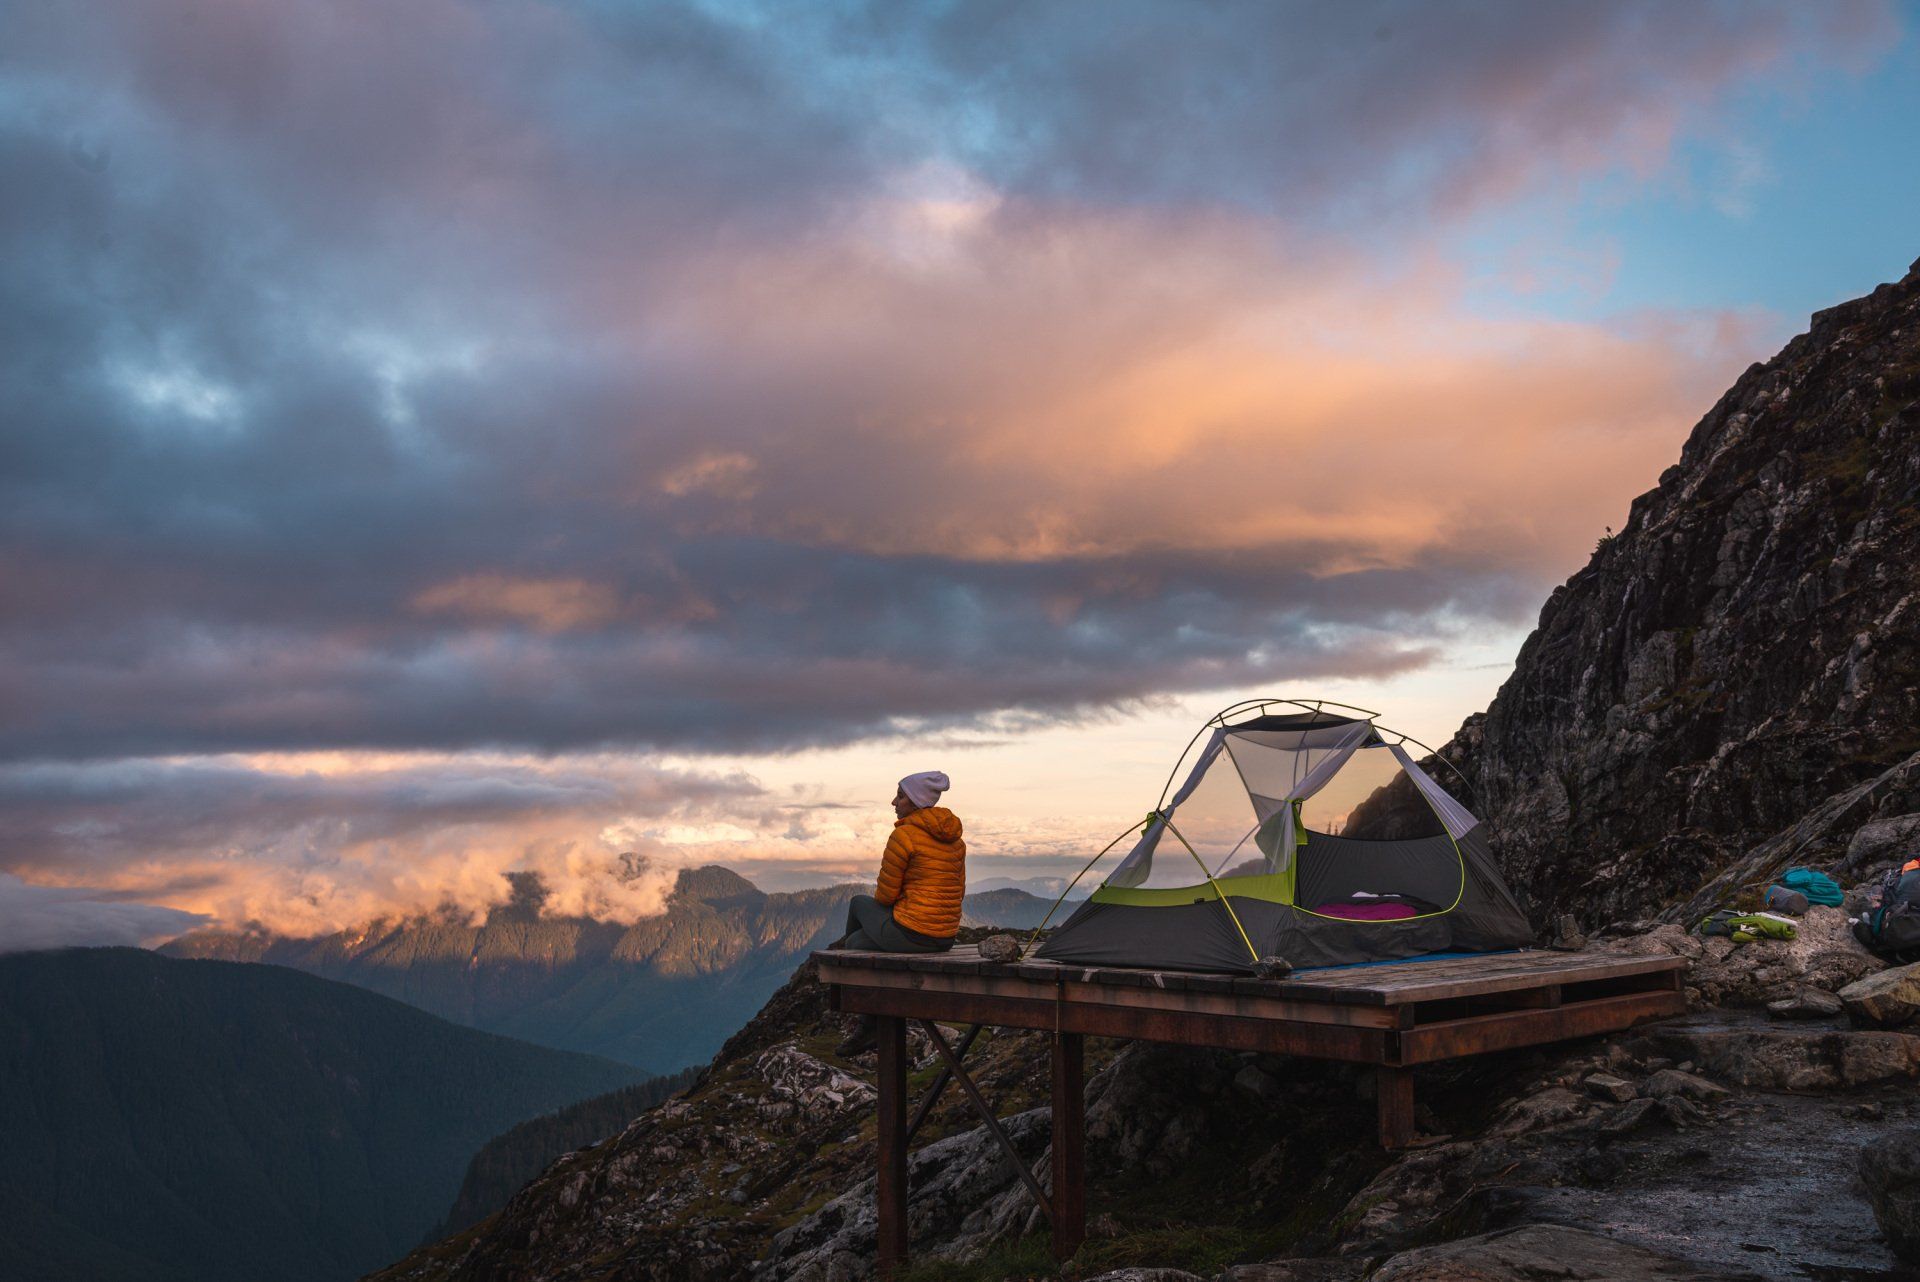 Sunset View from the ridge of Golden Ears mountain, BC, Canada